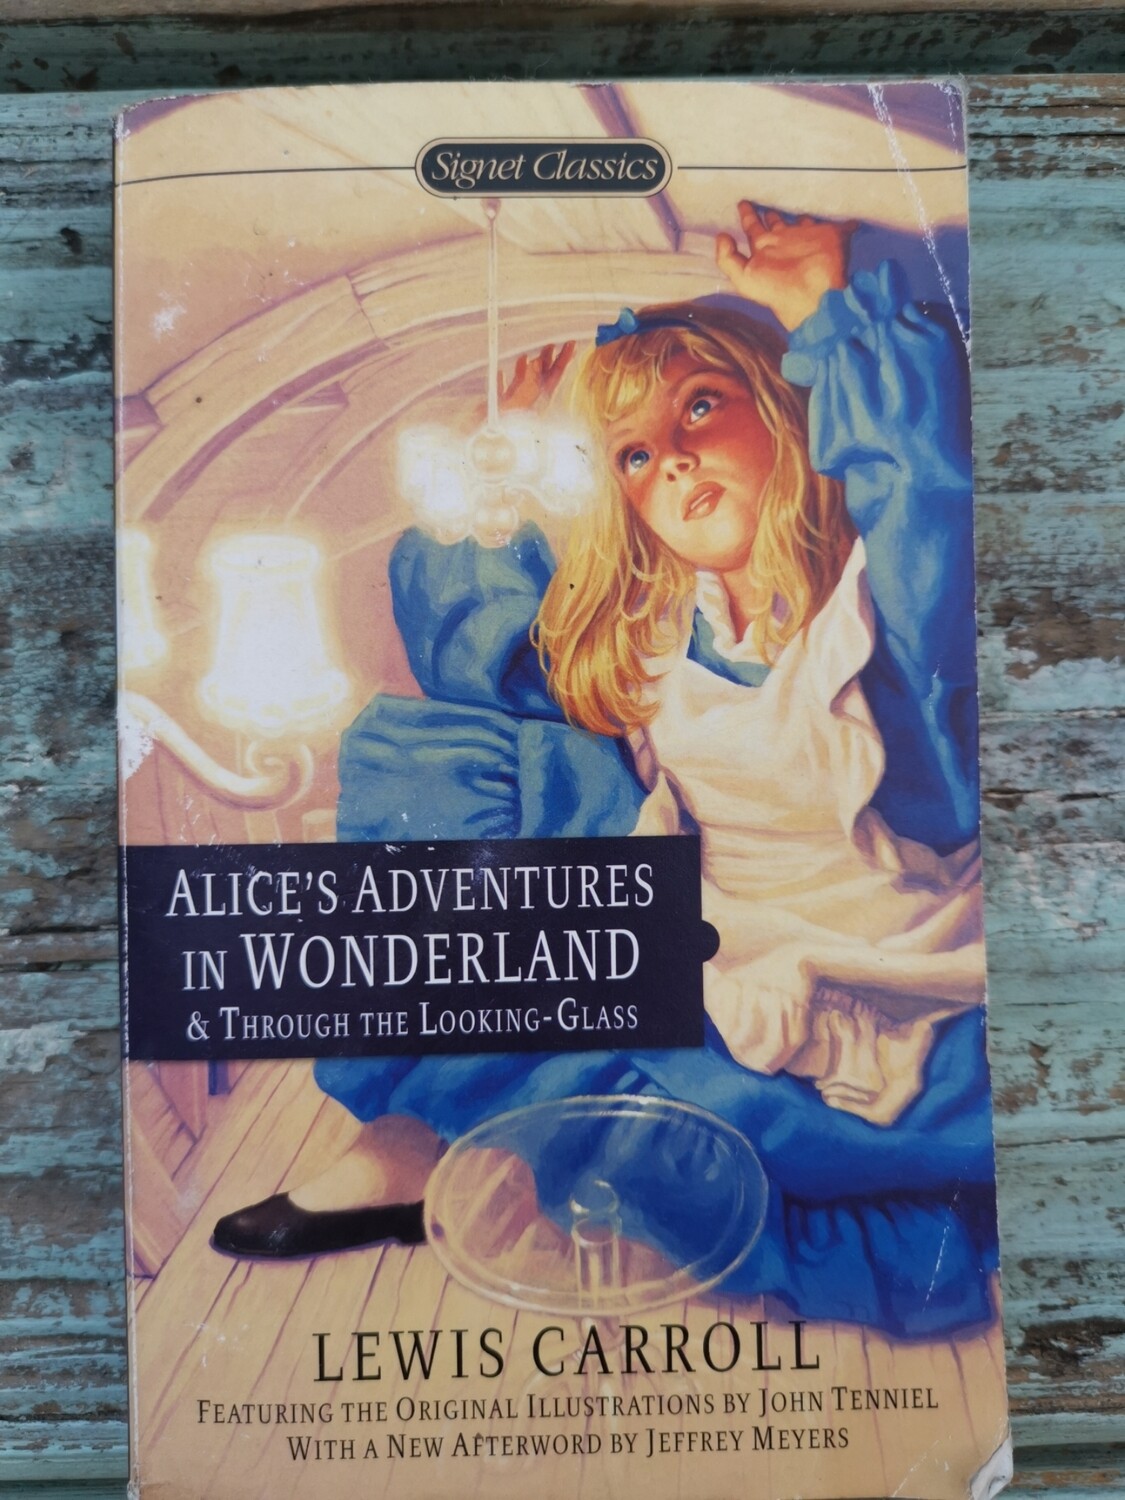 Alice's adventures in wonderland and Through the looking glass, Lewis Carroll